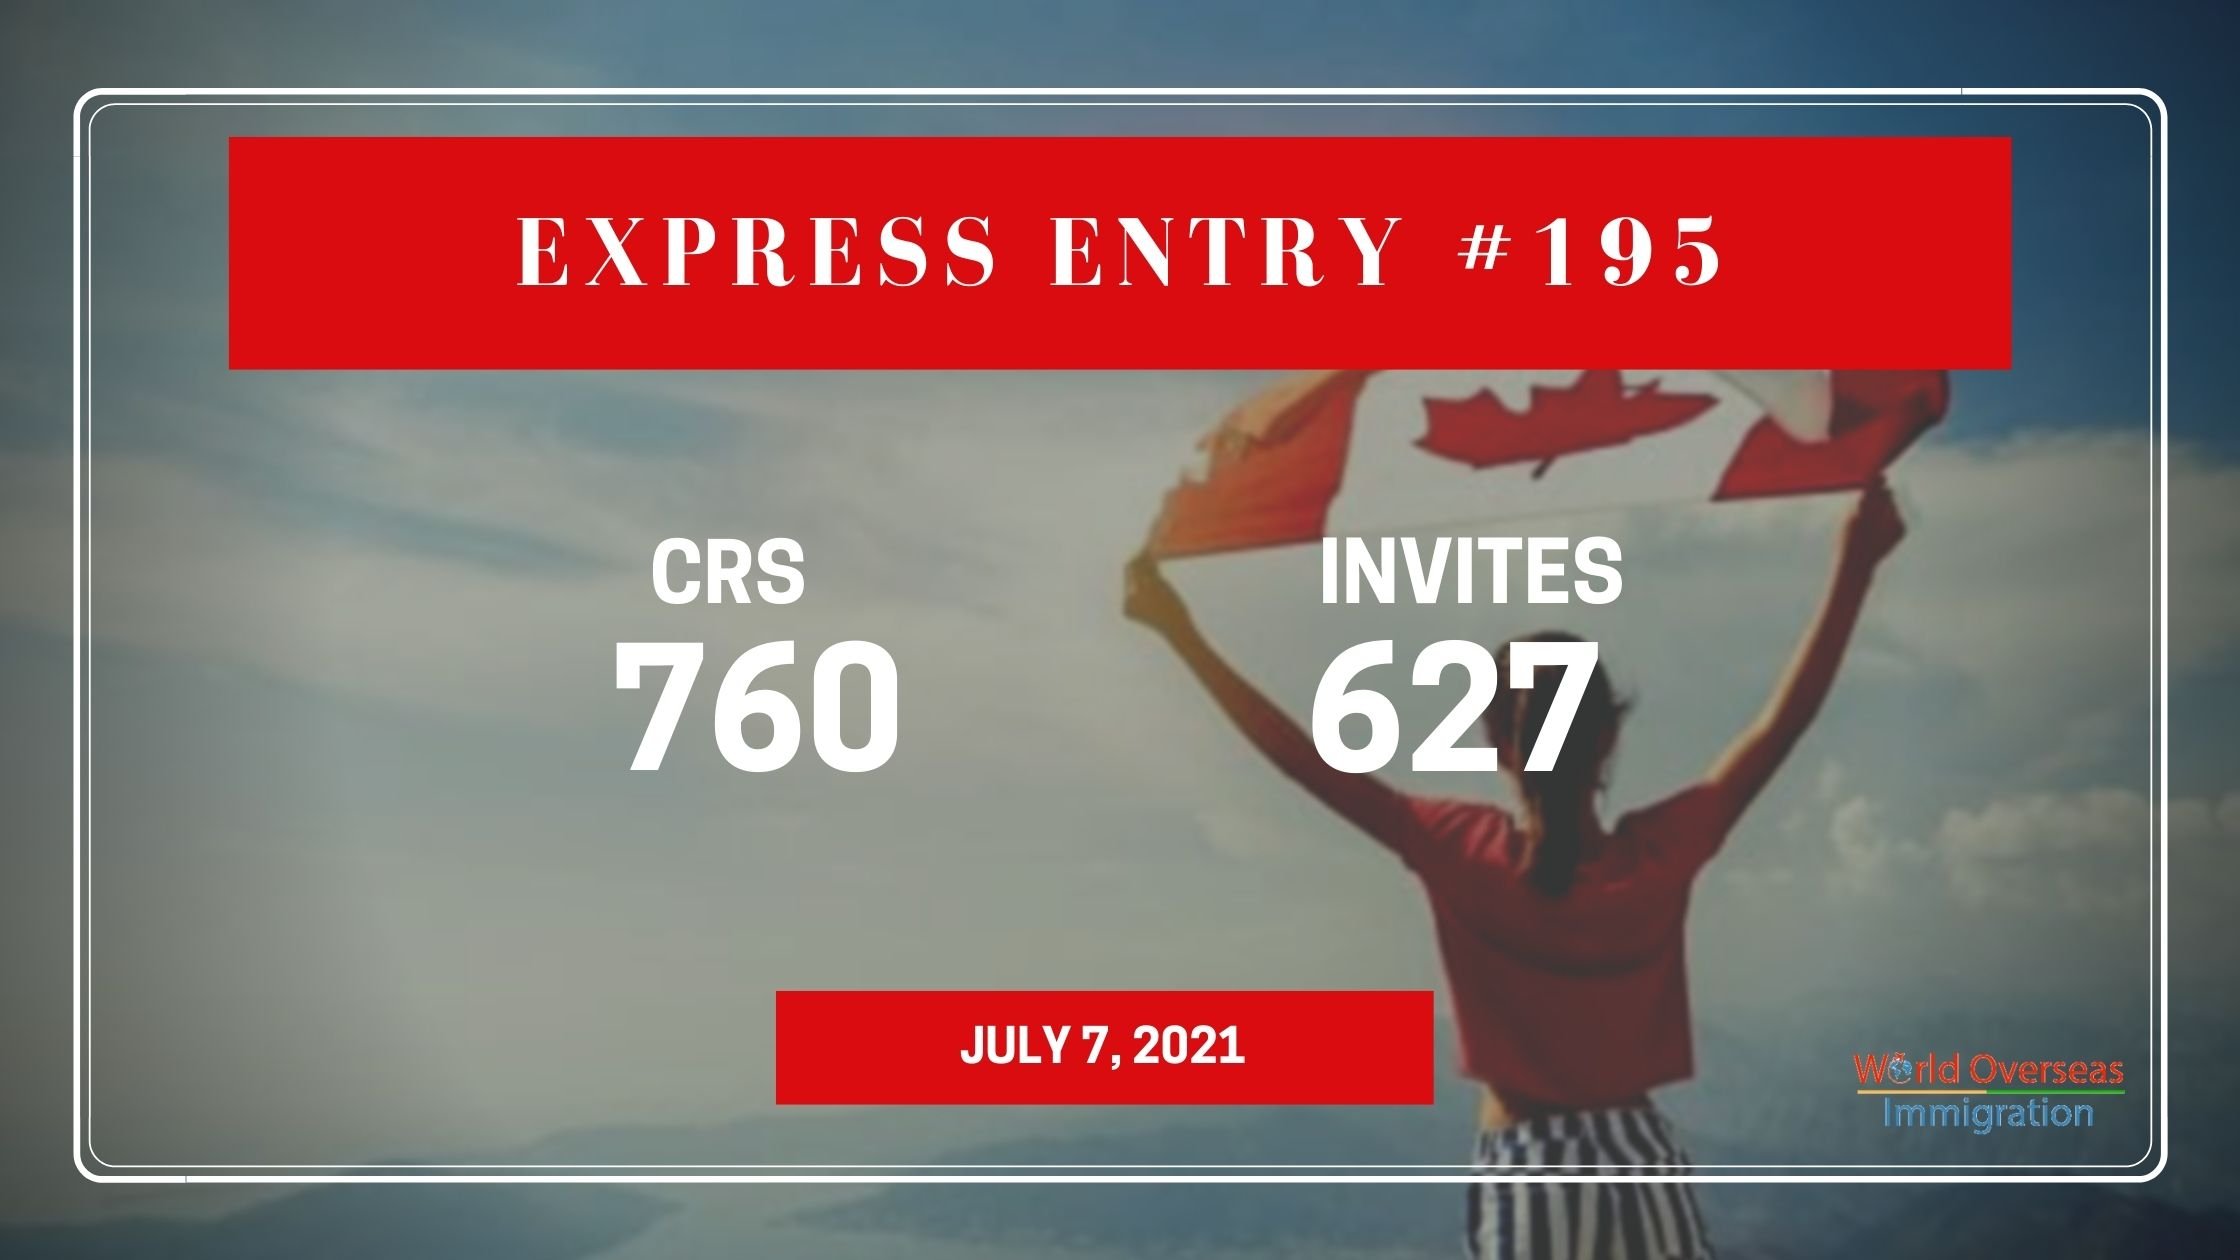 627 PNP candidates invited with CRS 760 under Express Entry- 7th July 2021